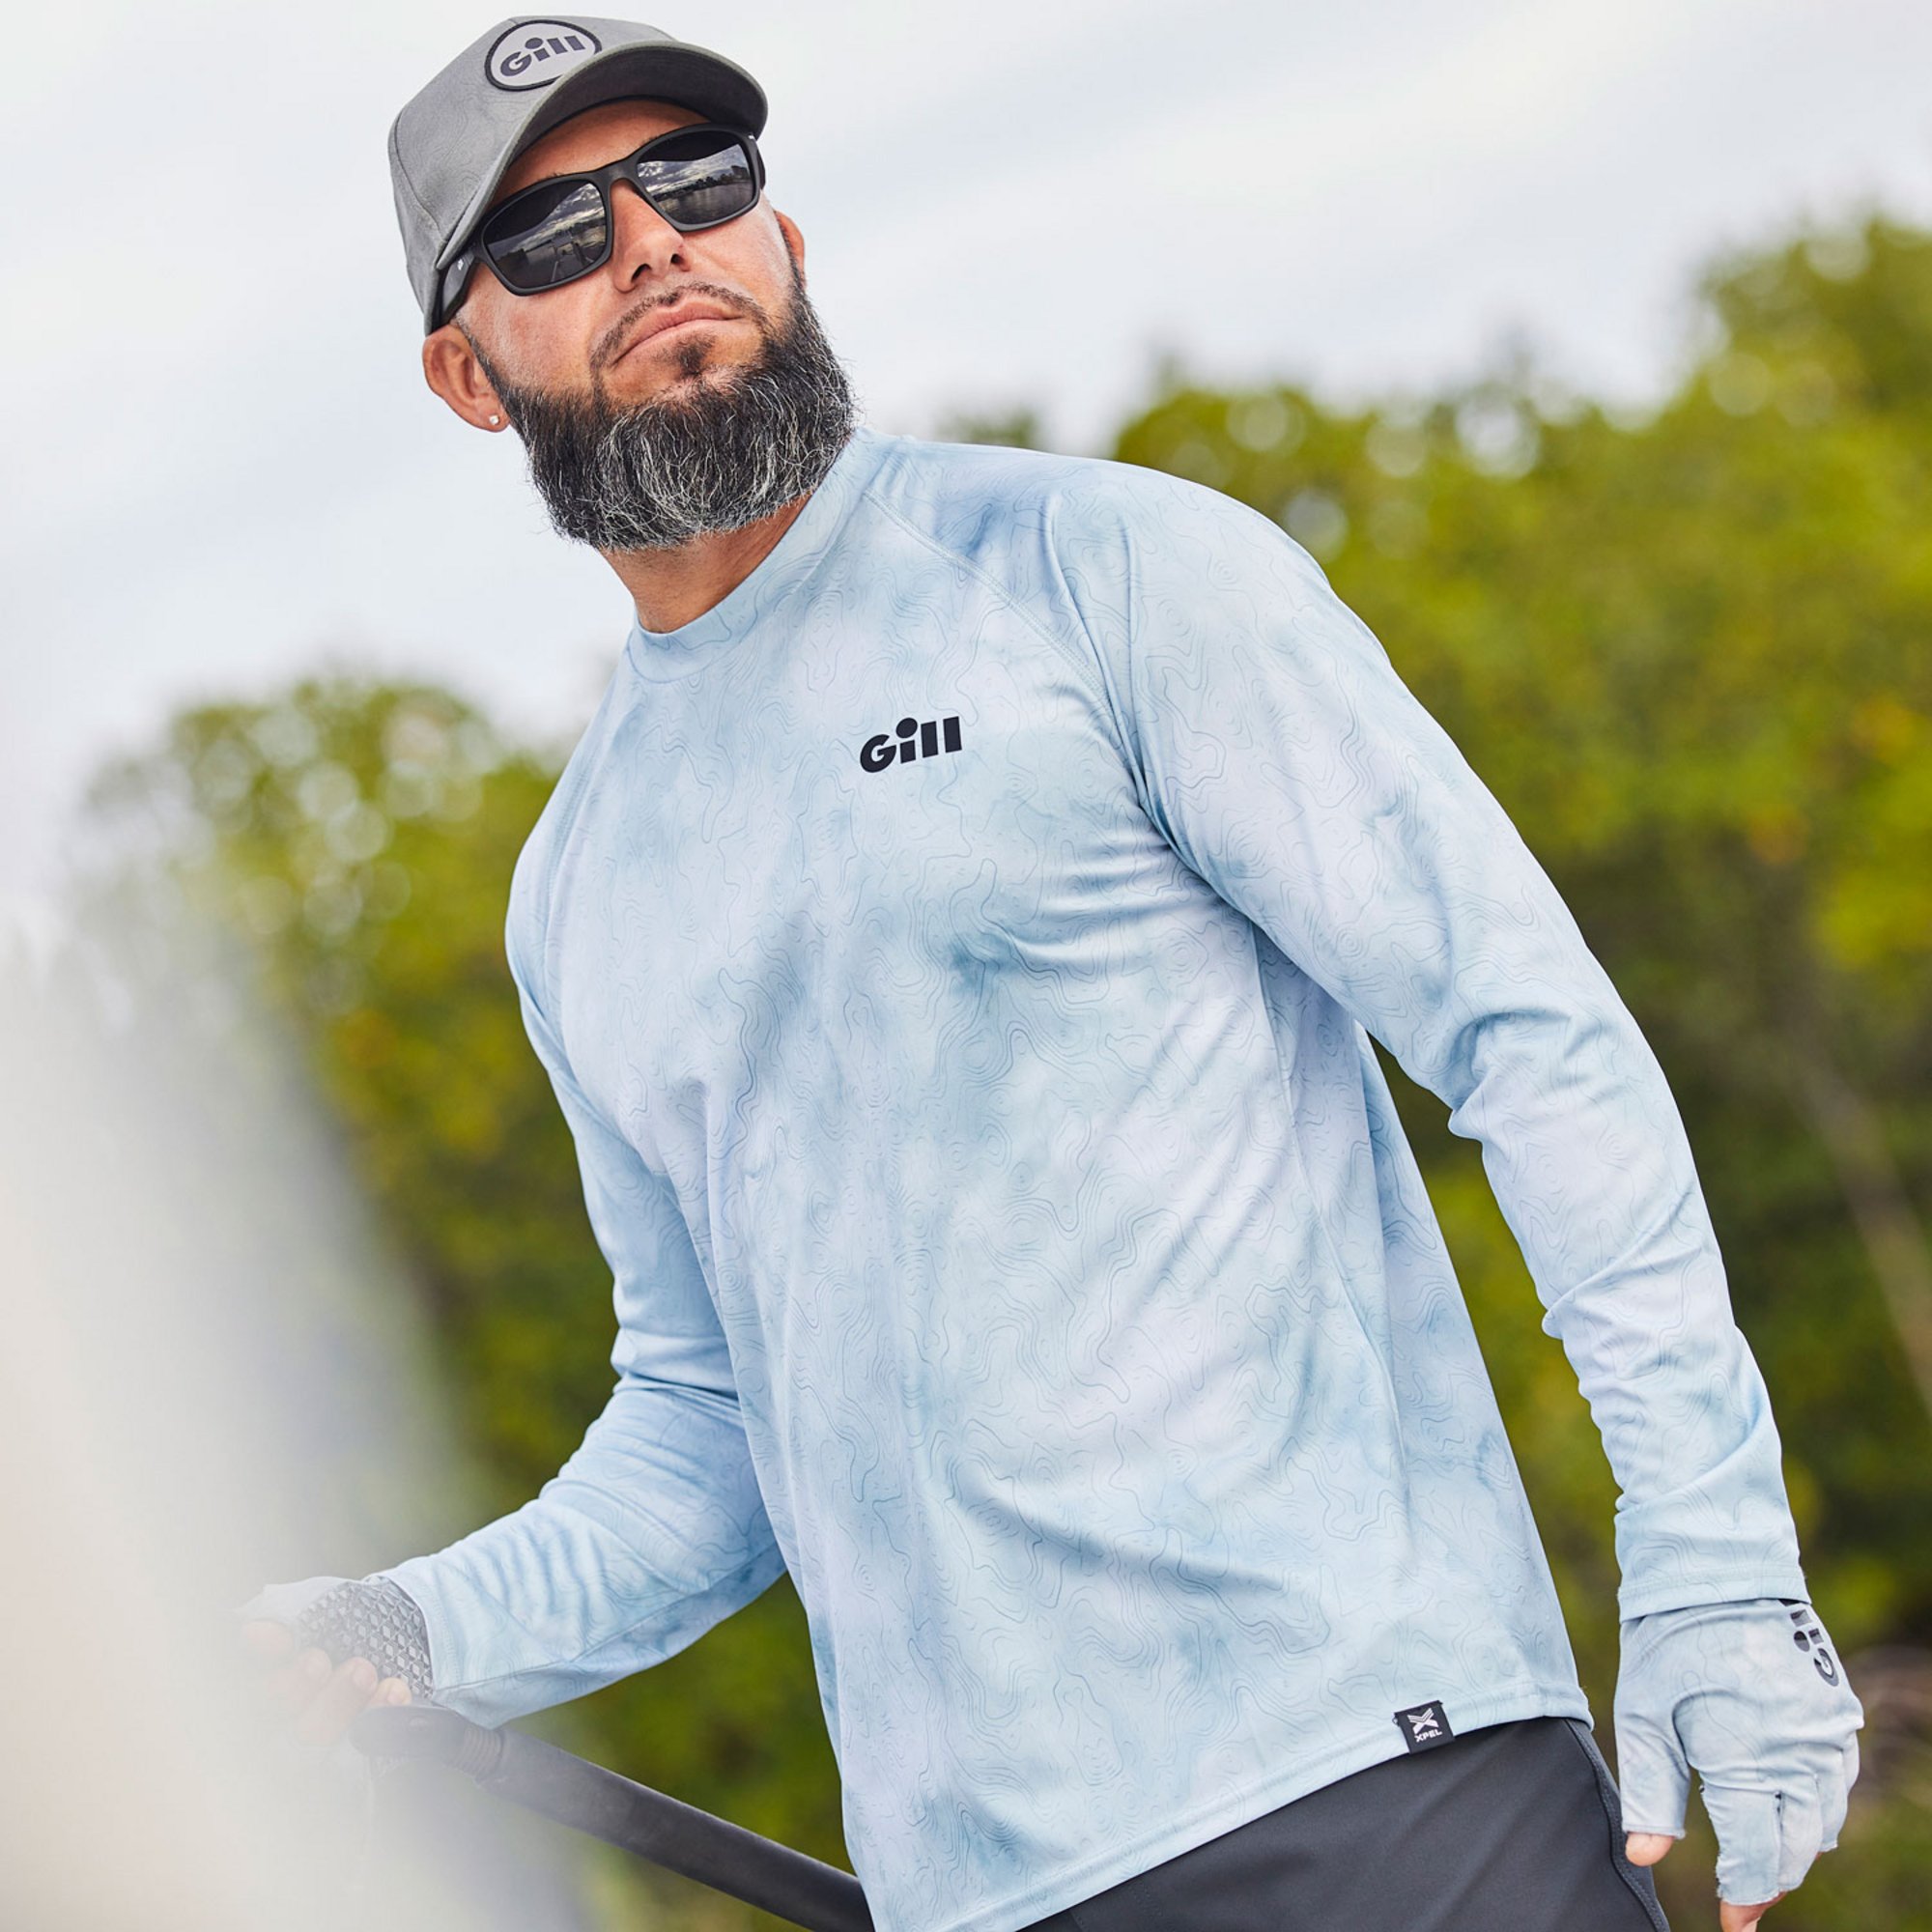 XPEL® Tec Long Sleeve Top in Glacier/Ice - FG500-ICE02-LIFESTYLE_2.jpg